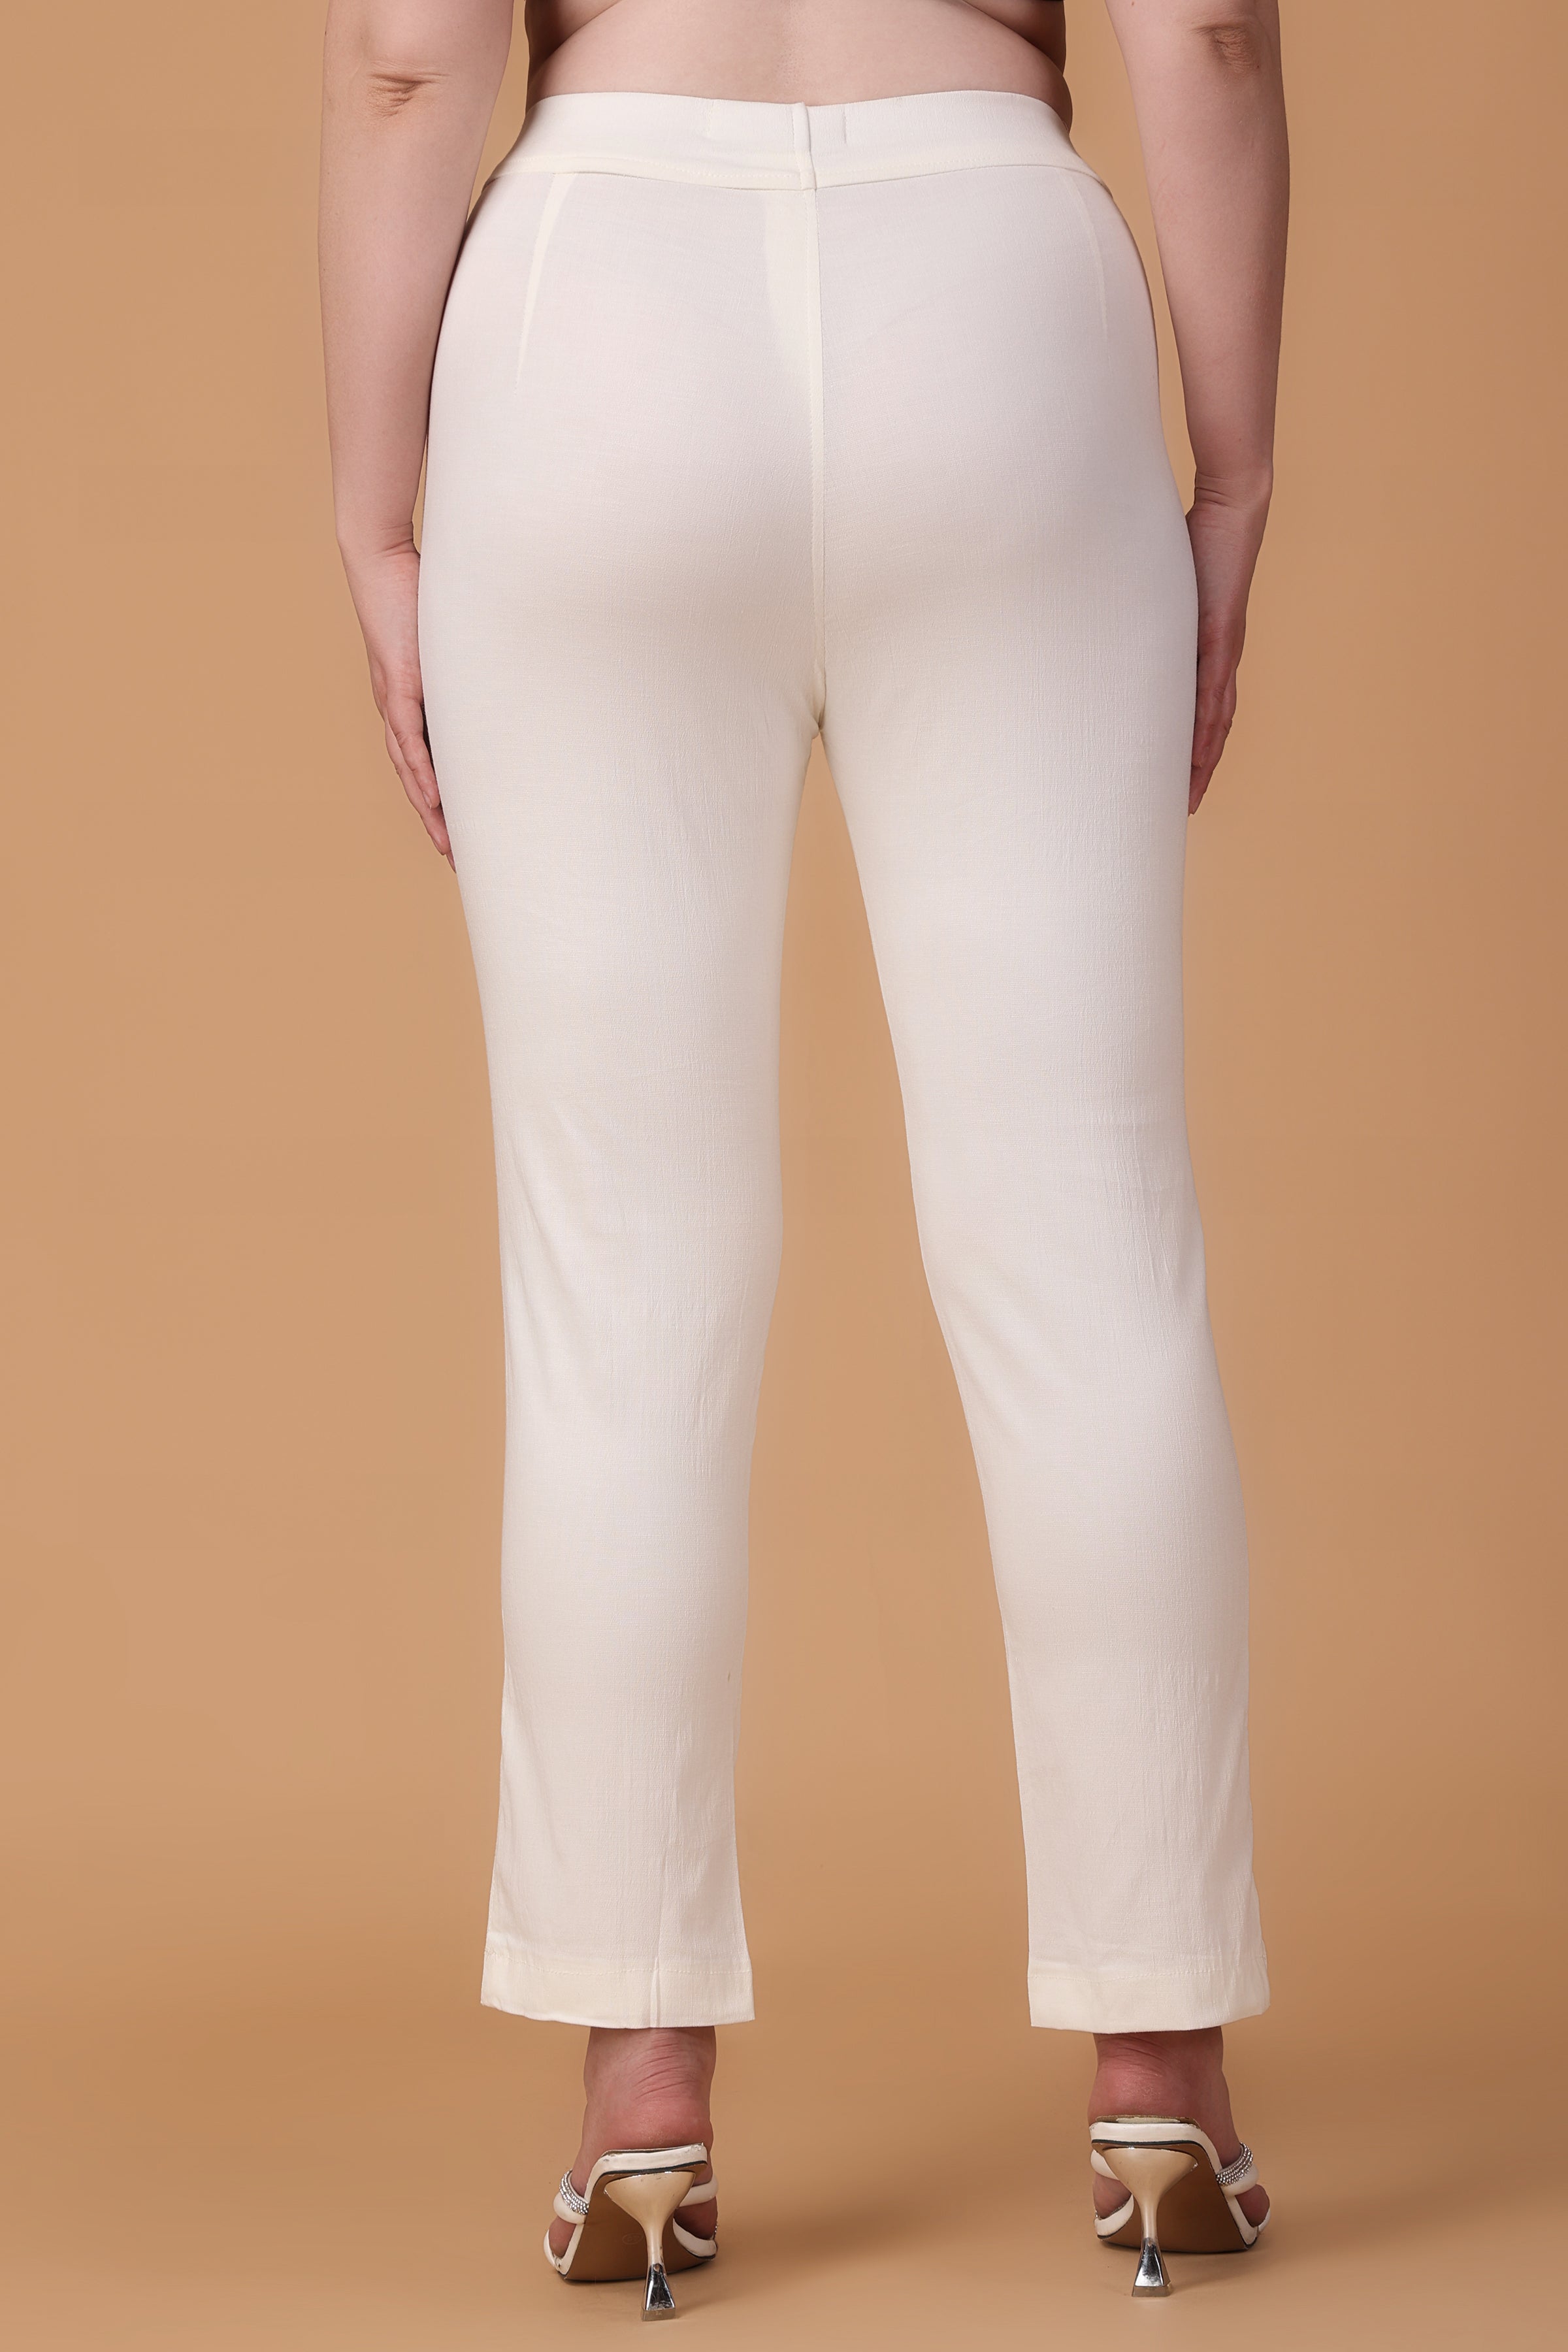 Lorcan Pants - High Waisted Tailored Pants in White | Showpo USA